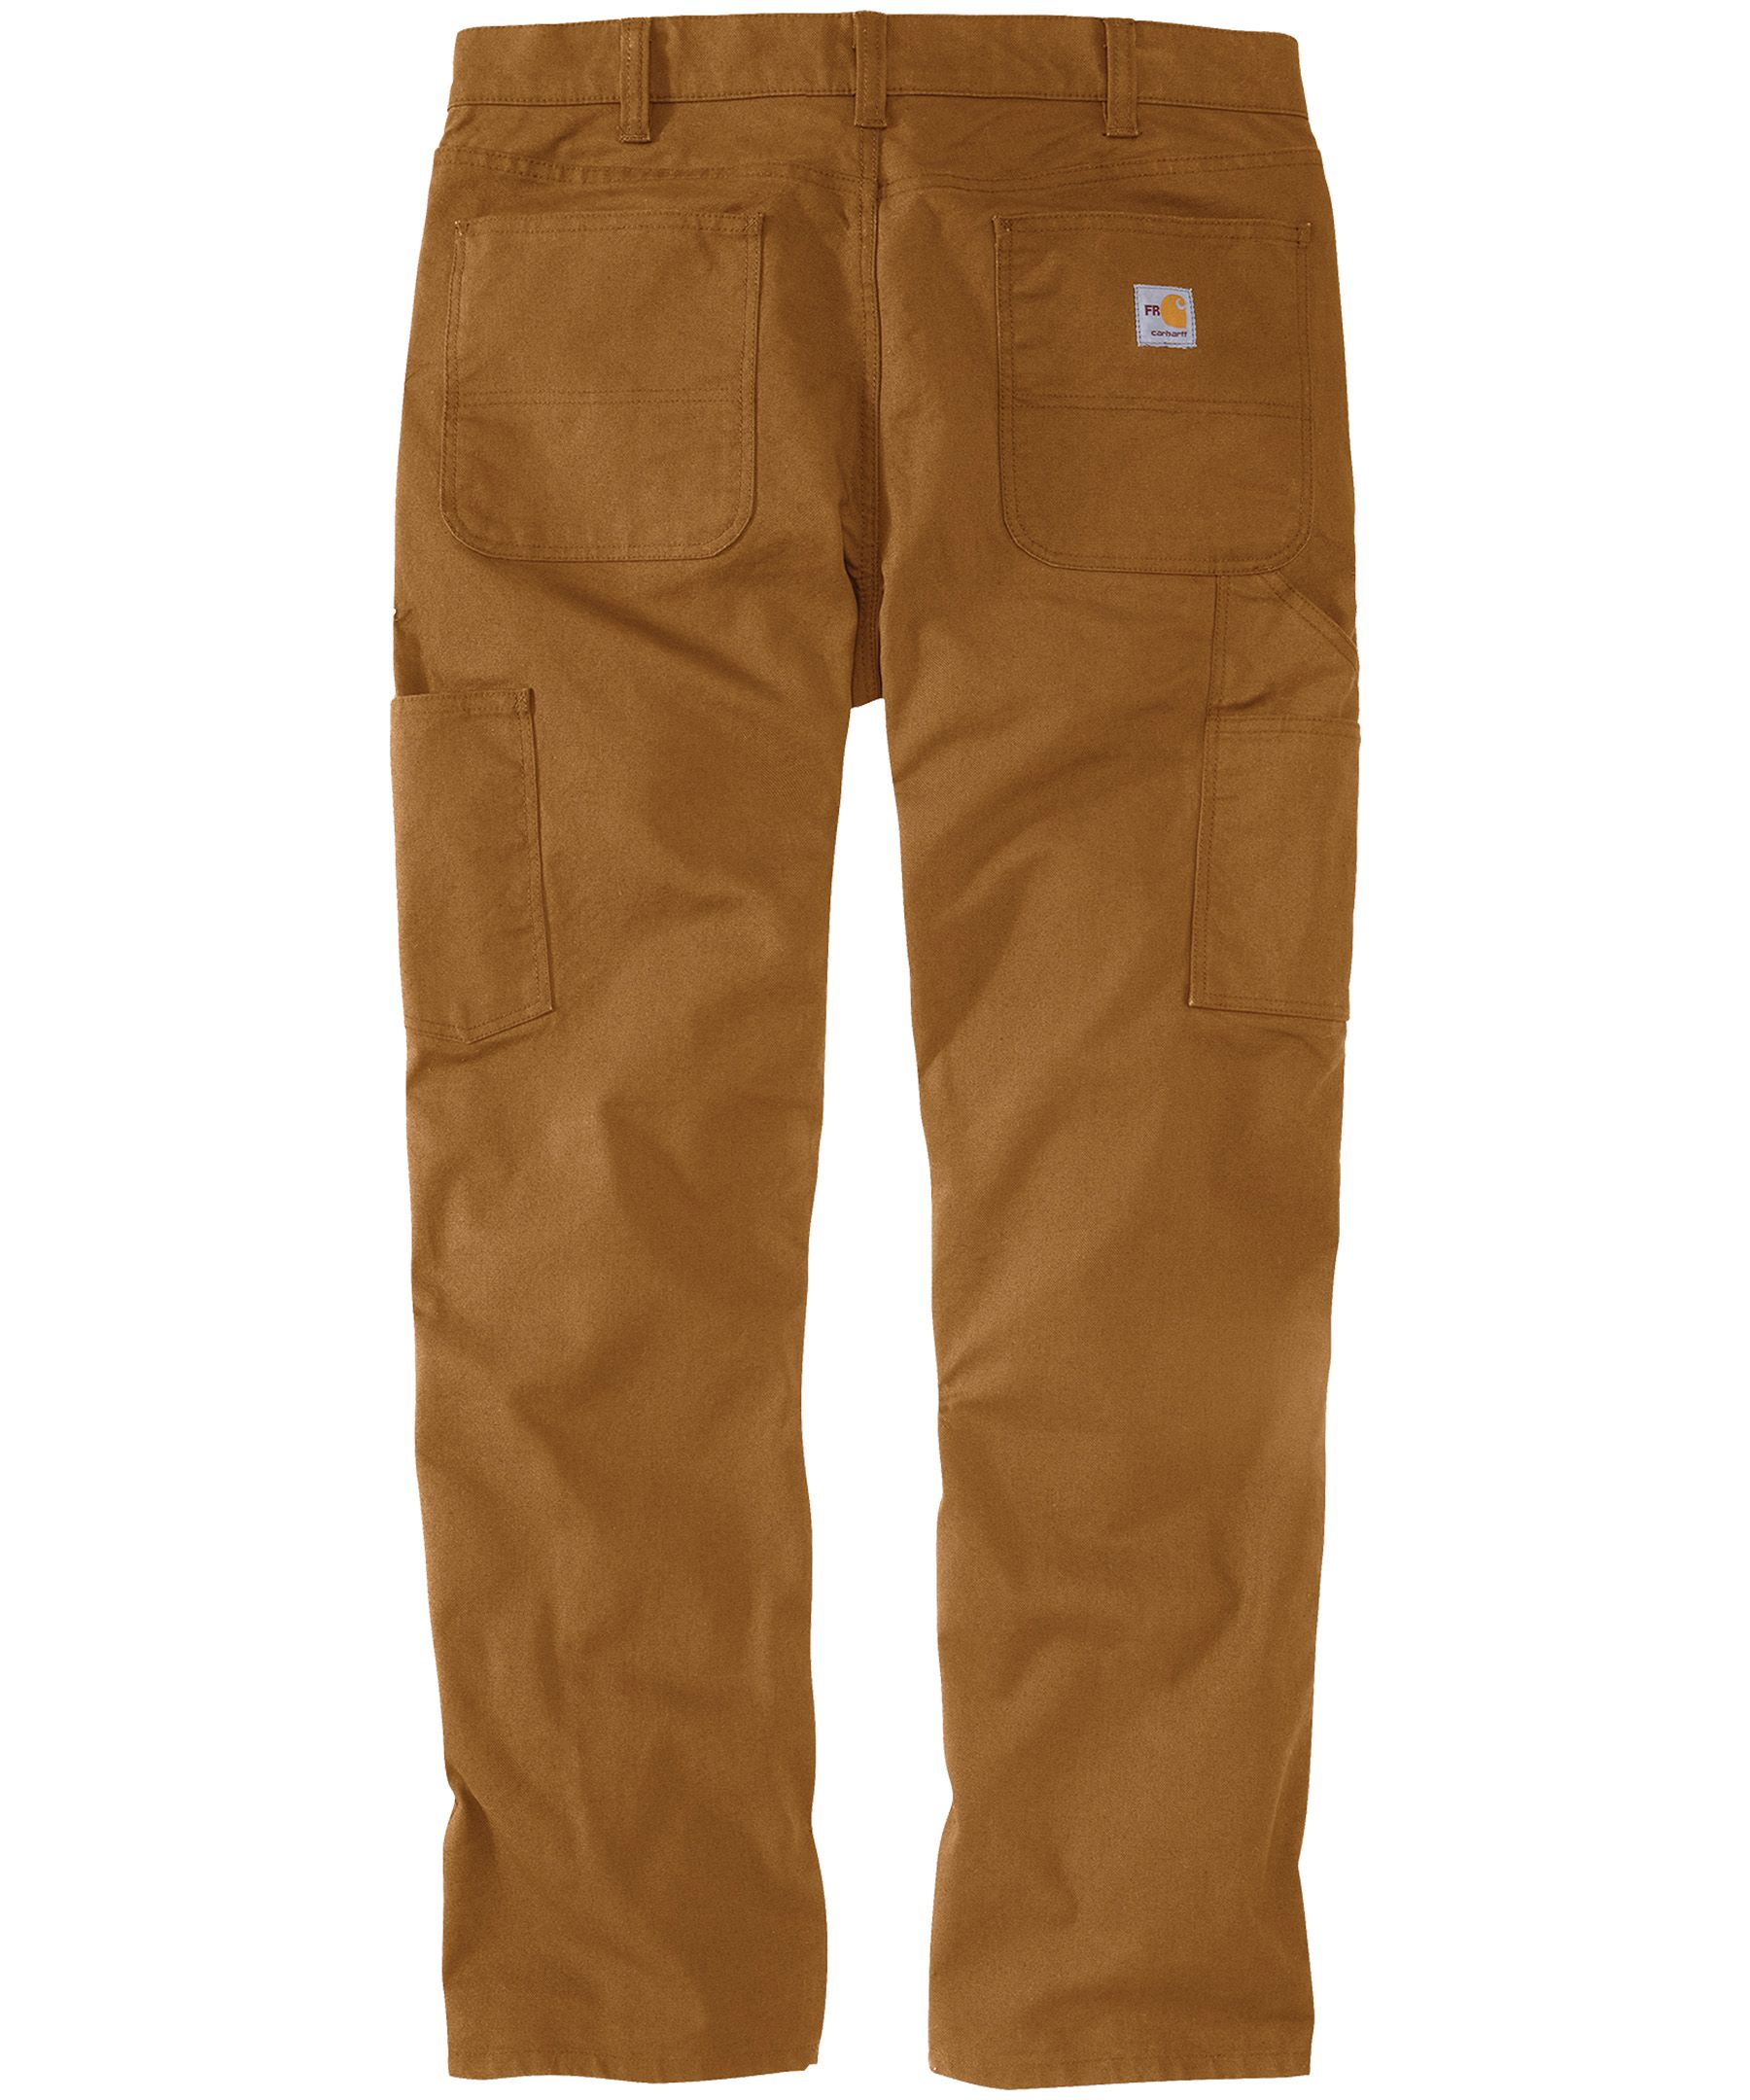 How to choose your Carhartt work pants